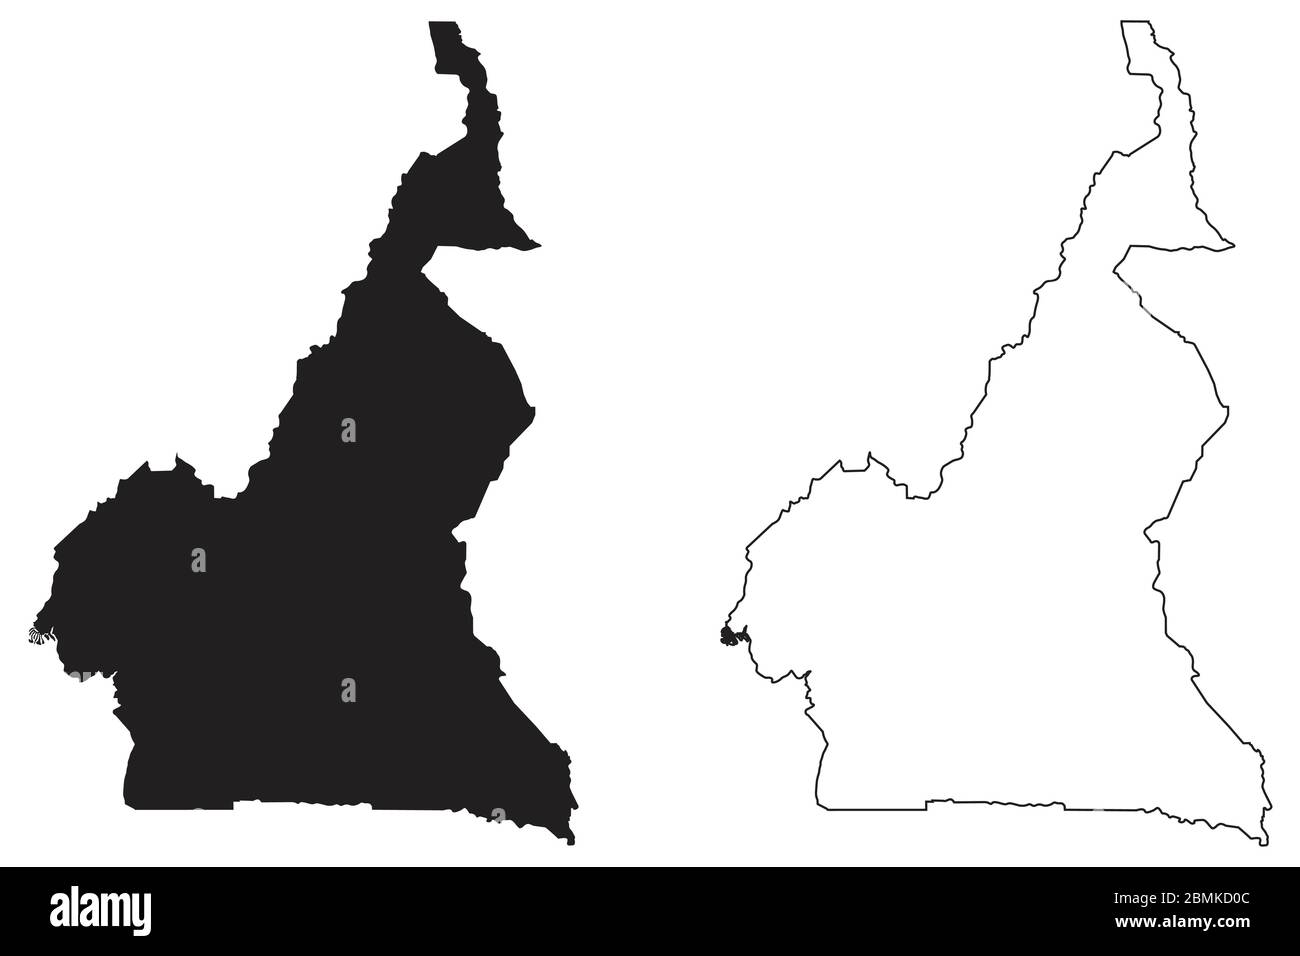 Cameroon Country Map. Black silhouette and outline isolated on white background. EPS Vector Stock Vector